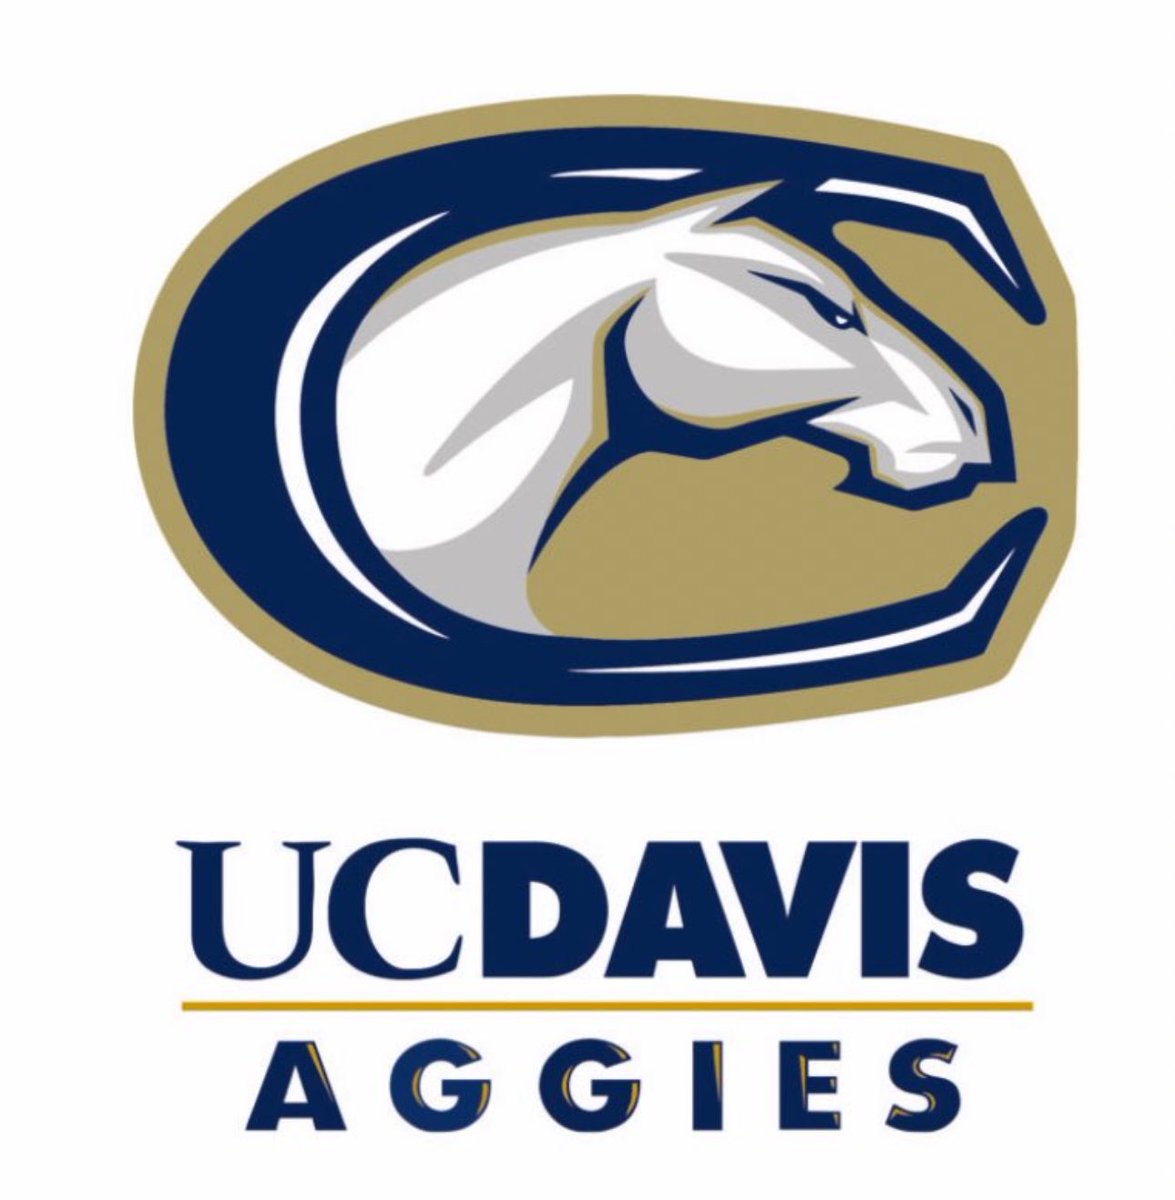 Blessed to say I have received a D1 scholarship from UC Davis, all glory to god #AggiePride @ColinLockett15 @Passing_Academy @coach_angel3